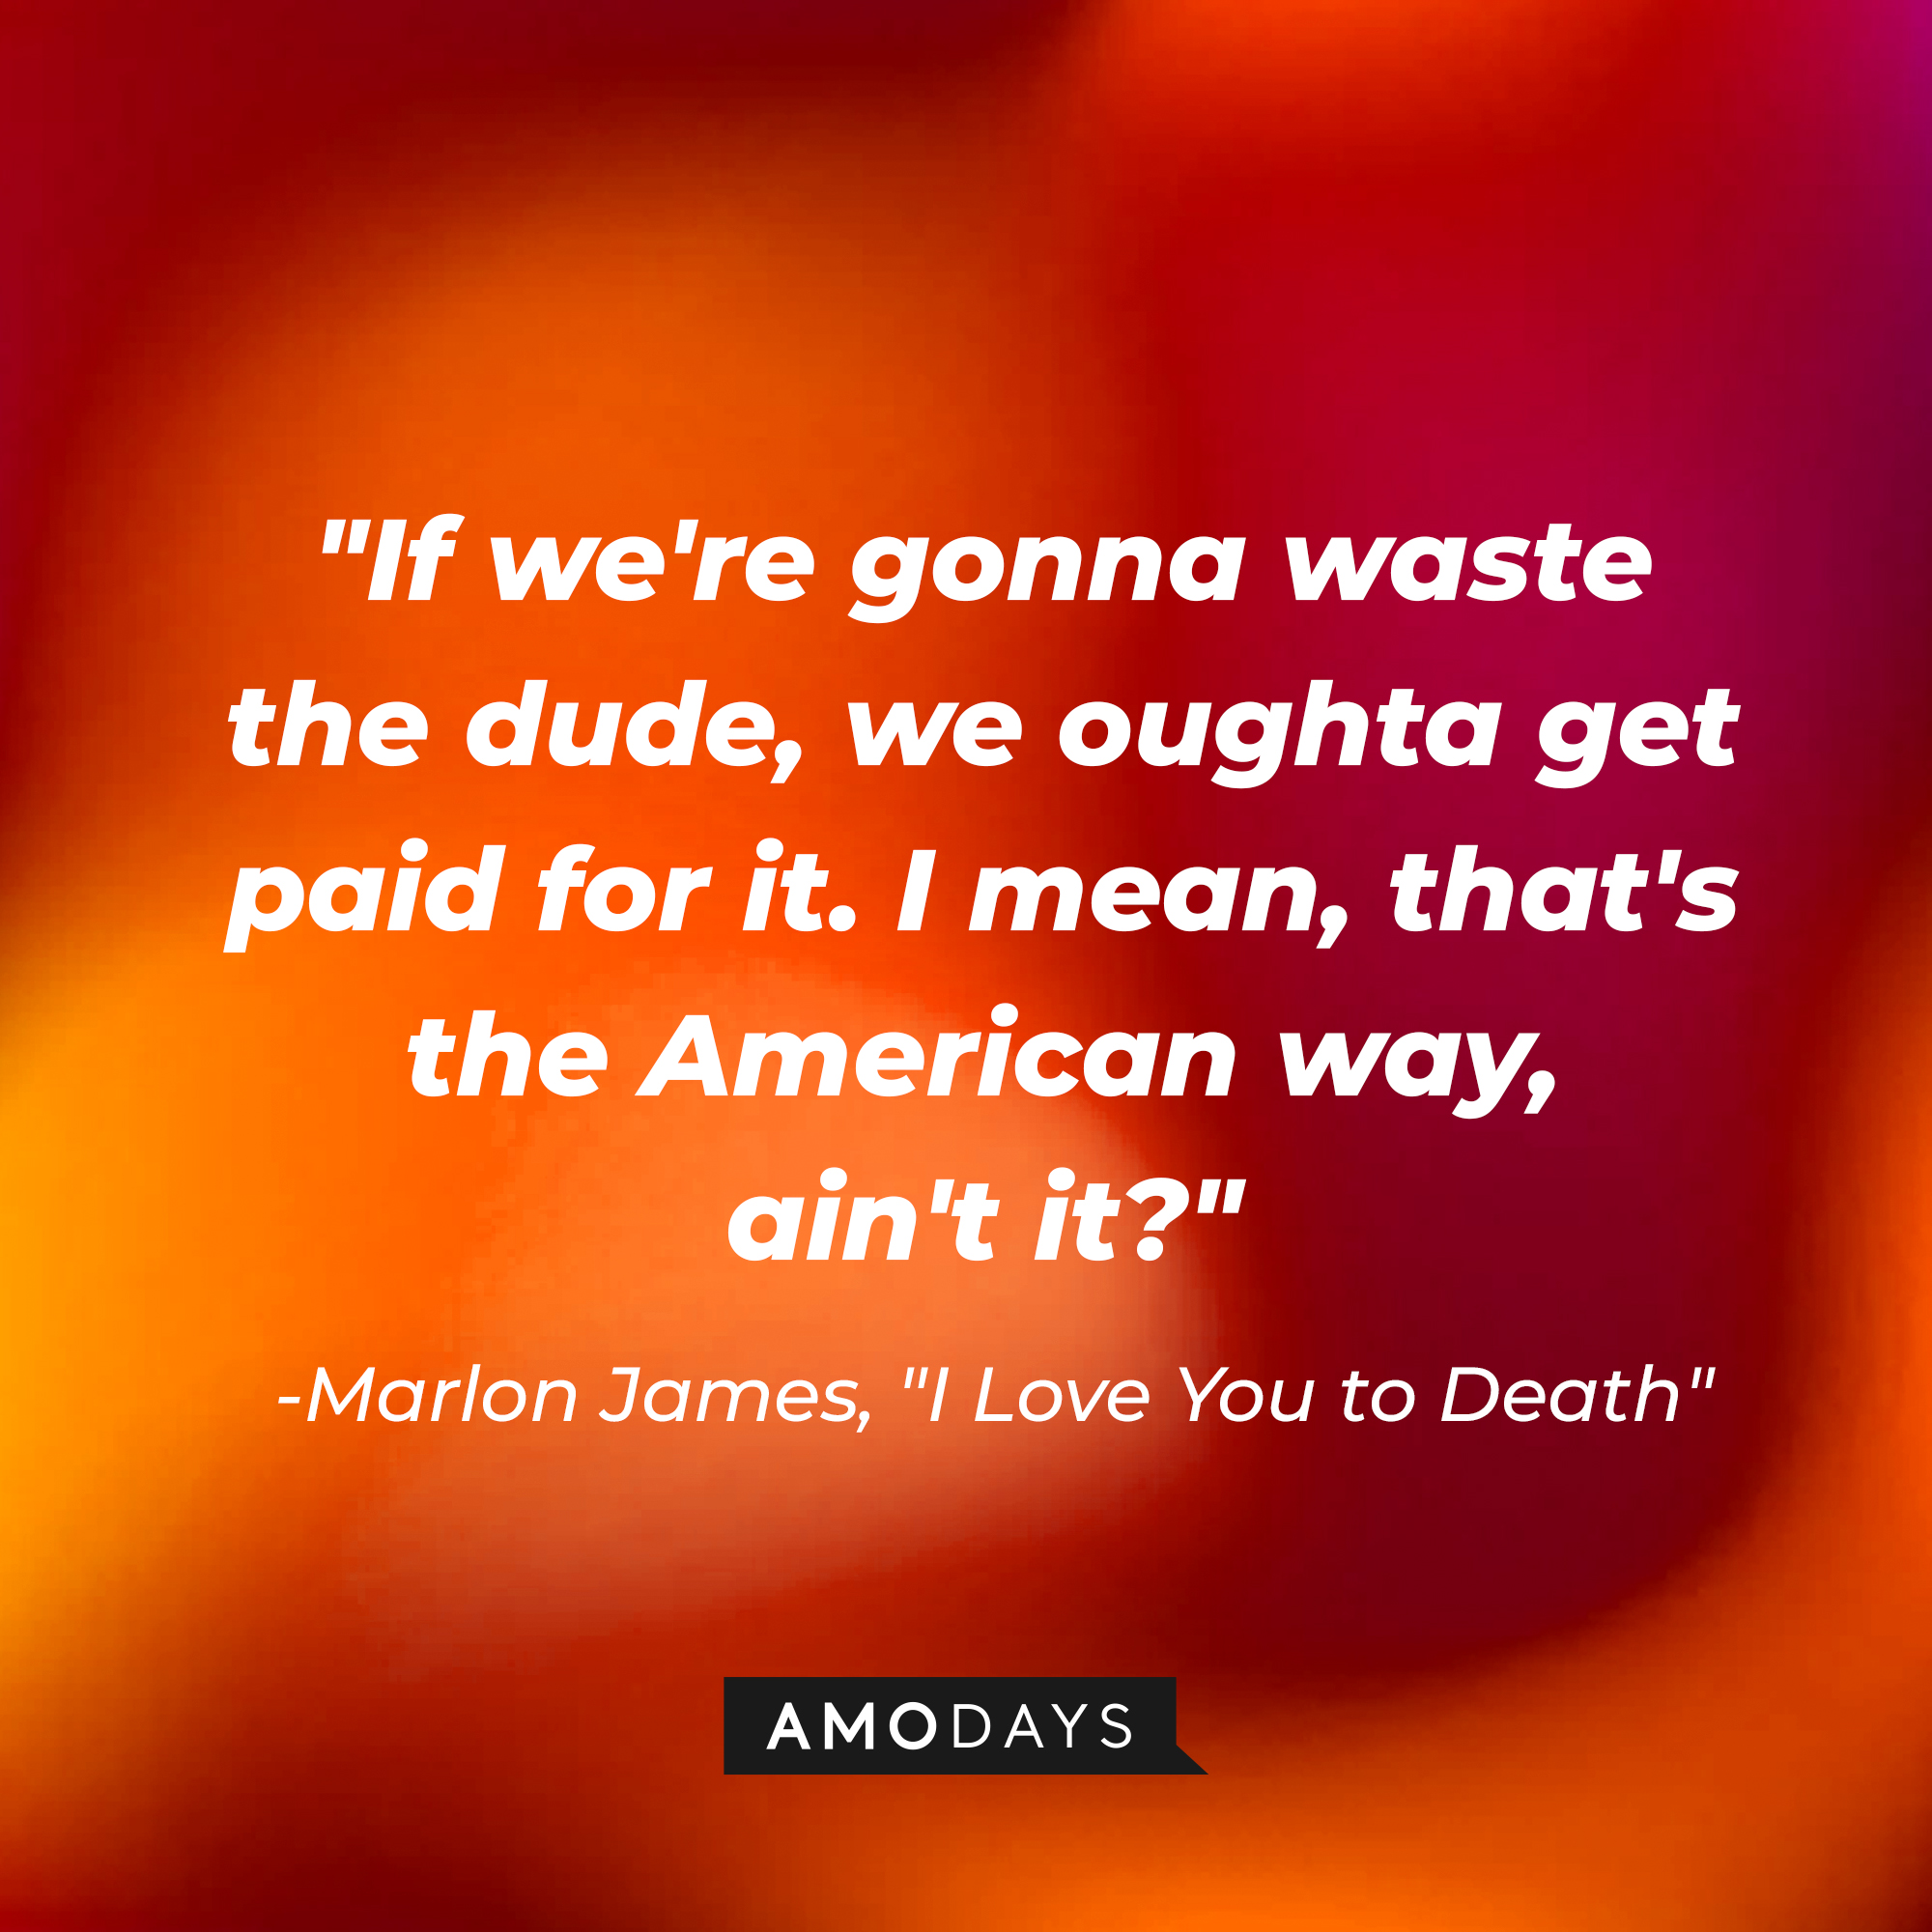 Marlon James' quote: "If we're gonna waste the dude, we oughta get paid for it. I mean, that's the American way, ain't it?" | Source: AmoDays